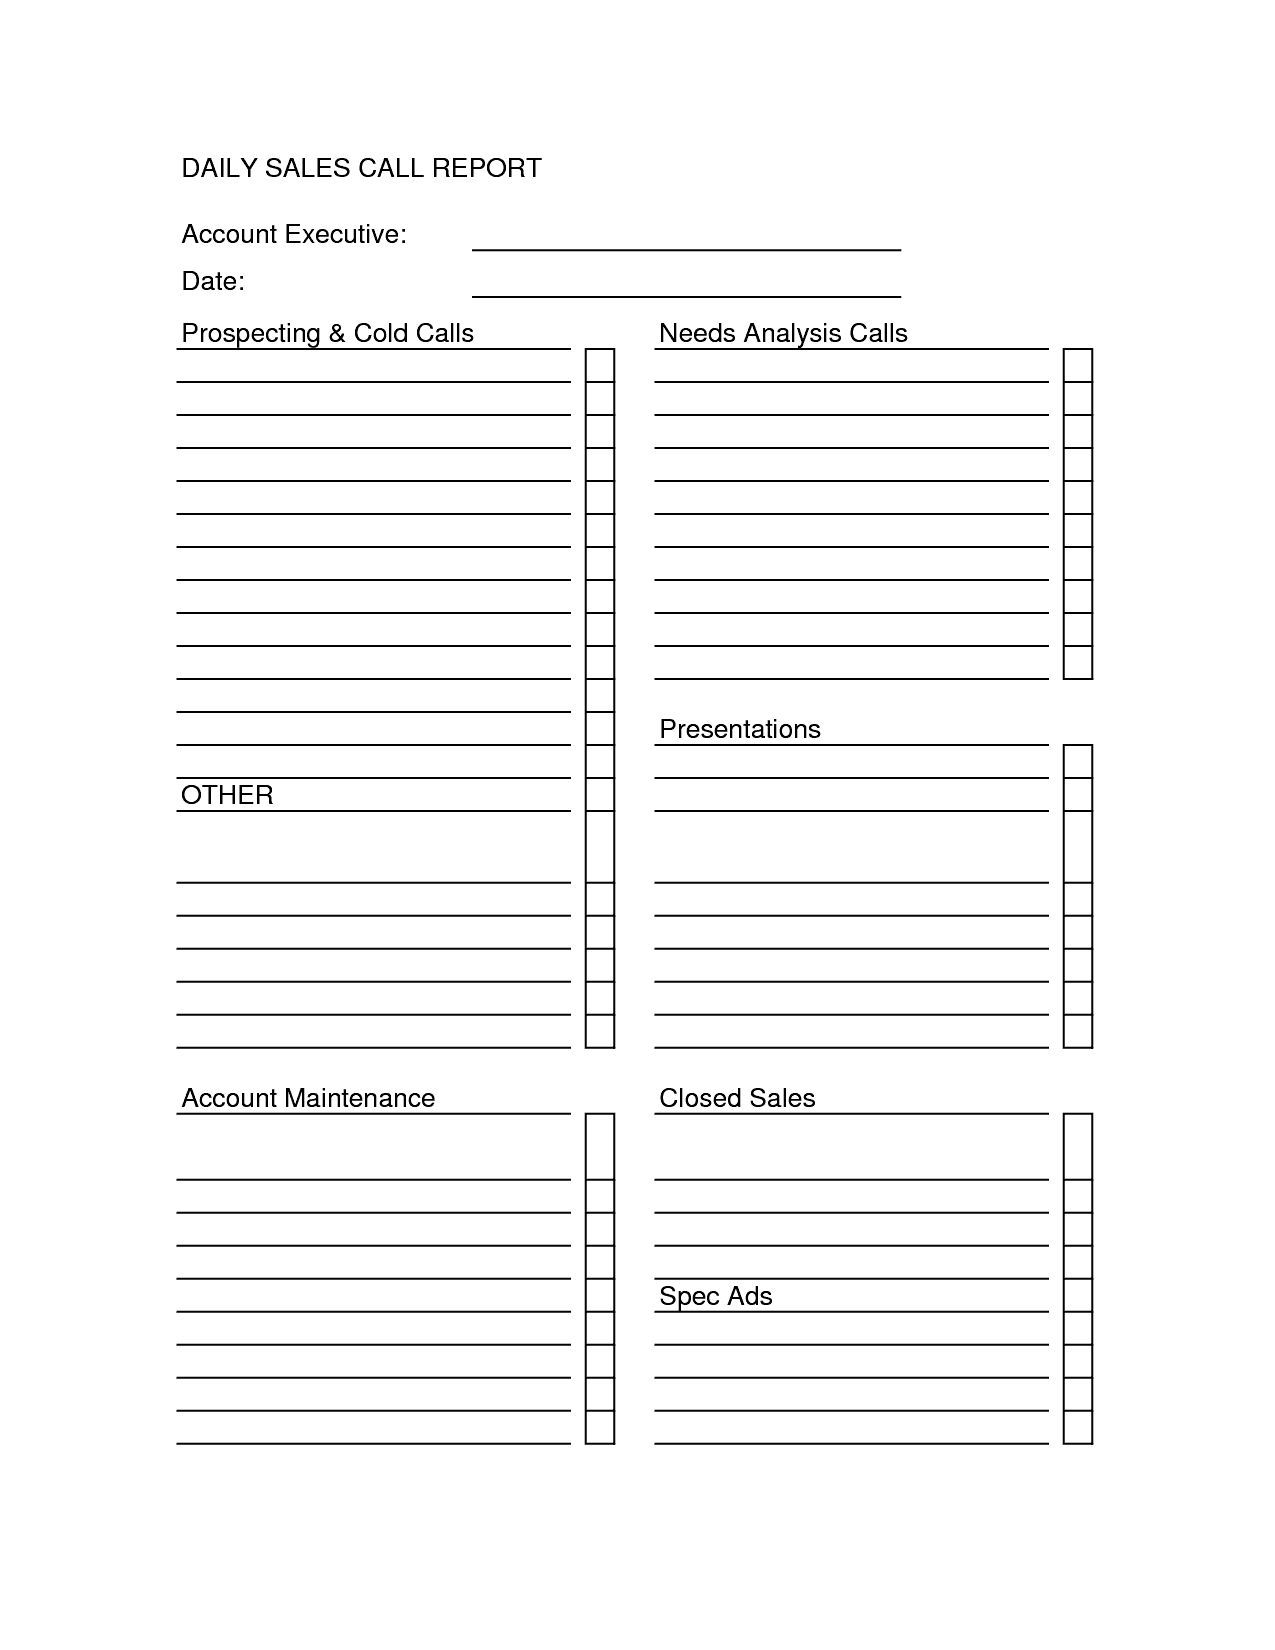 Sales Call Report Templates - Word Excel Fomats In Free Daily Sales Report Excel Template